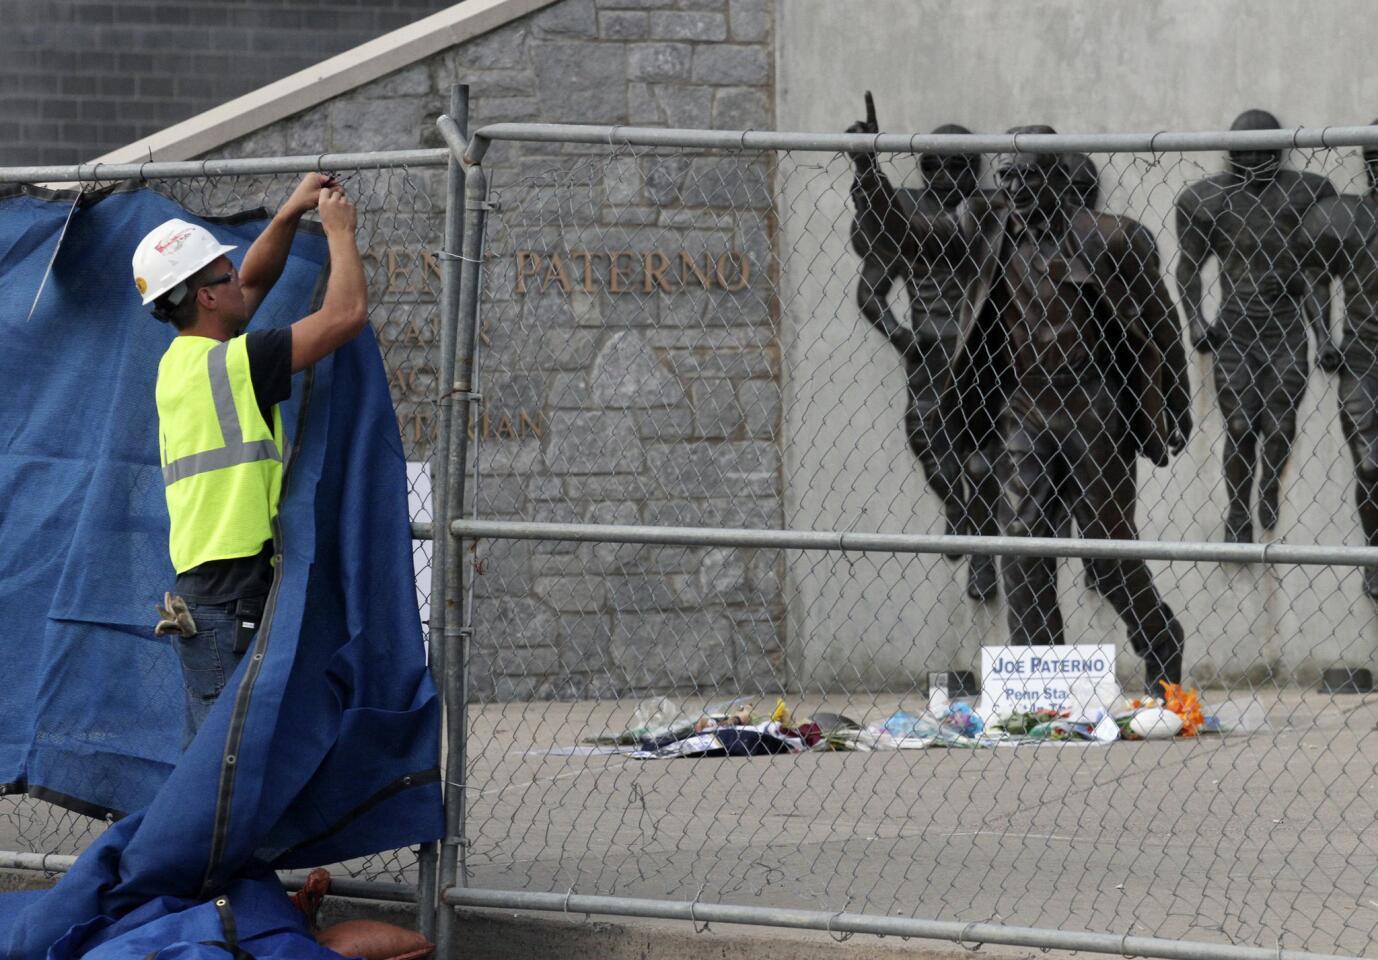 A worker puts up tarps on a temporary fence around the statue of the late Penn State football coach Joe Paterno before removing the statue outside Beaver Stadium in State College, Pennsylvania, July 22, 2010. The removed statue was placed it inside the stadium early Sunday, moments after the university president announced the school's intention to remove it.